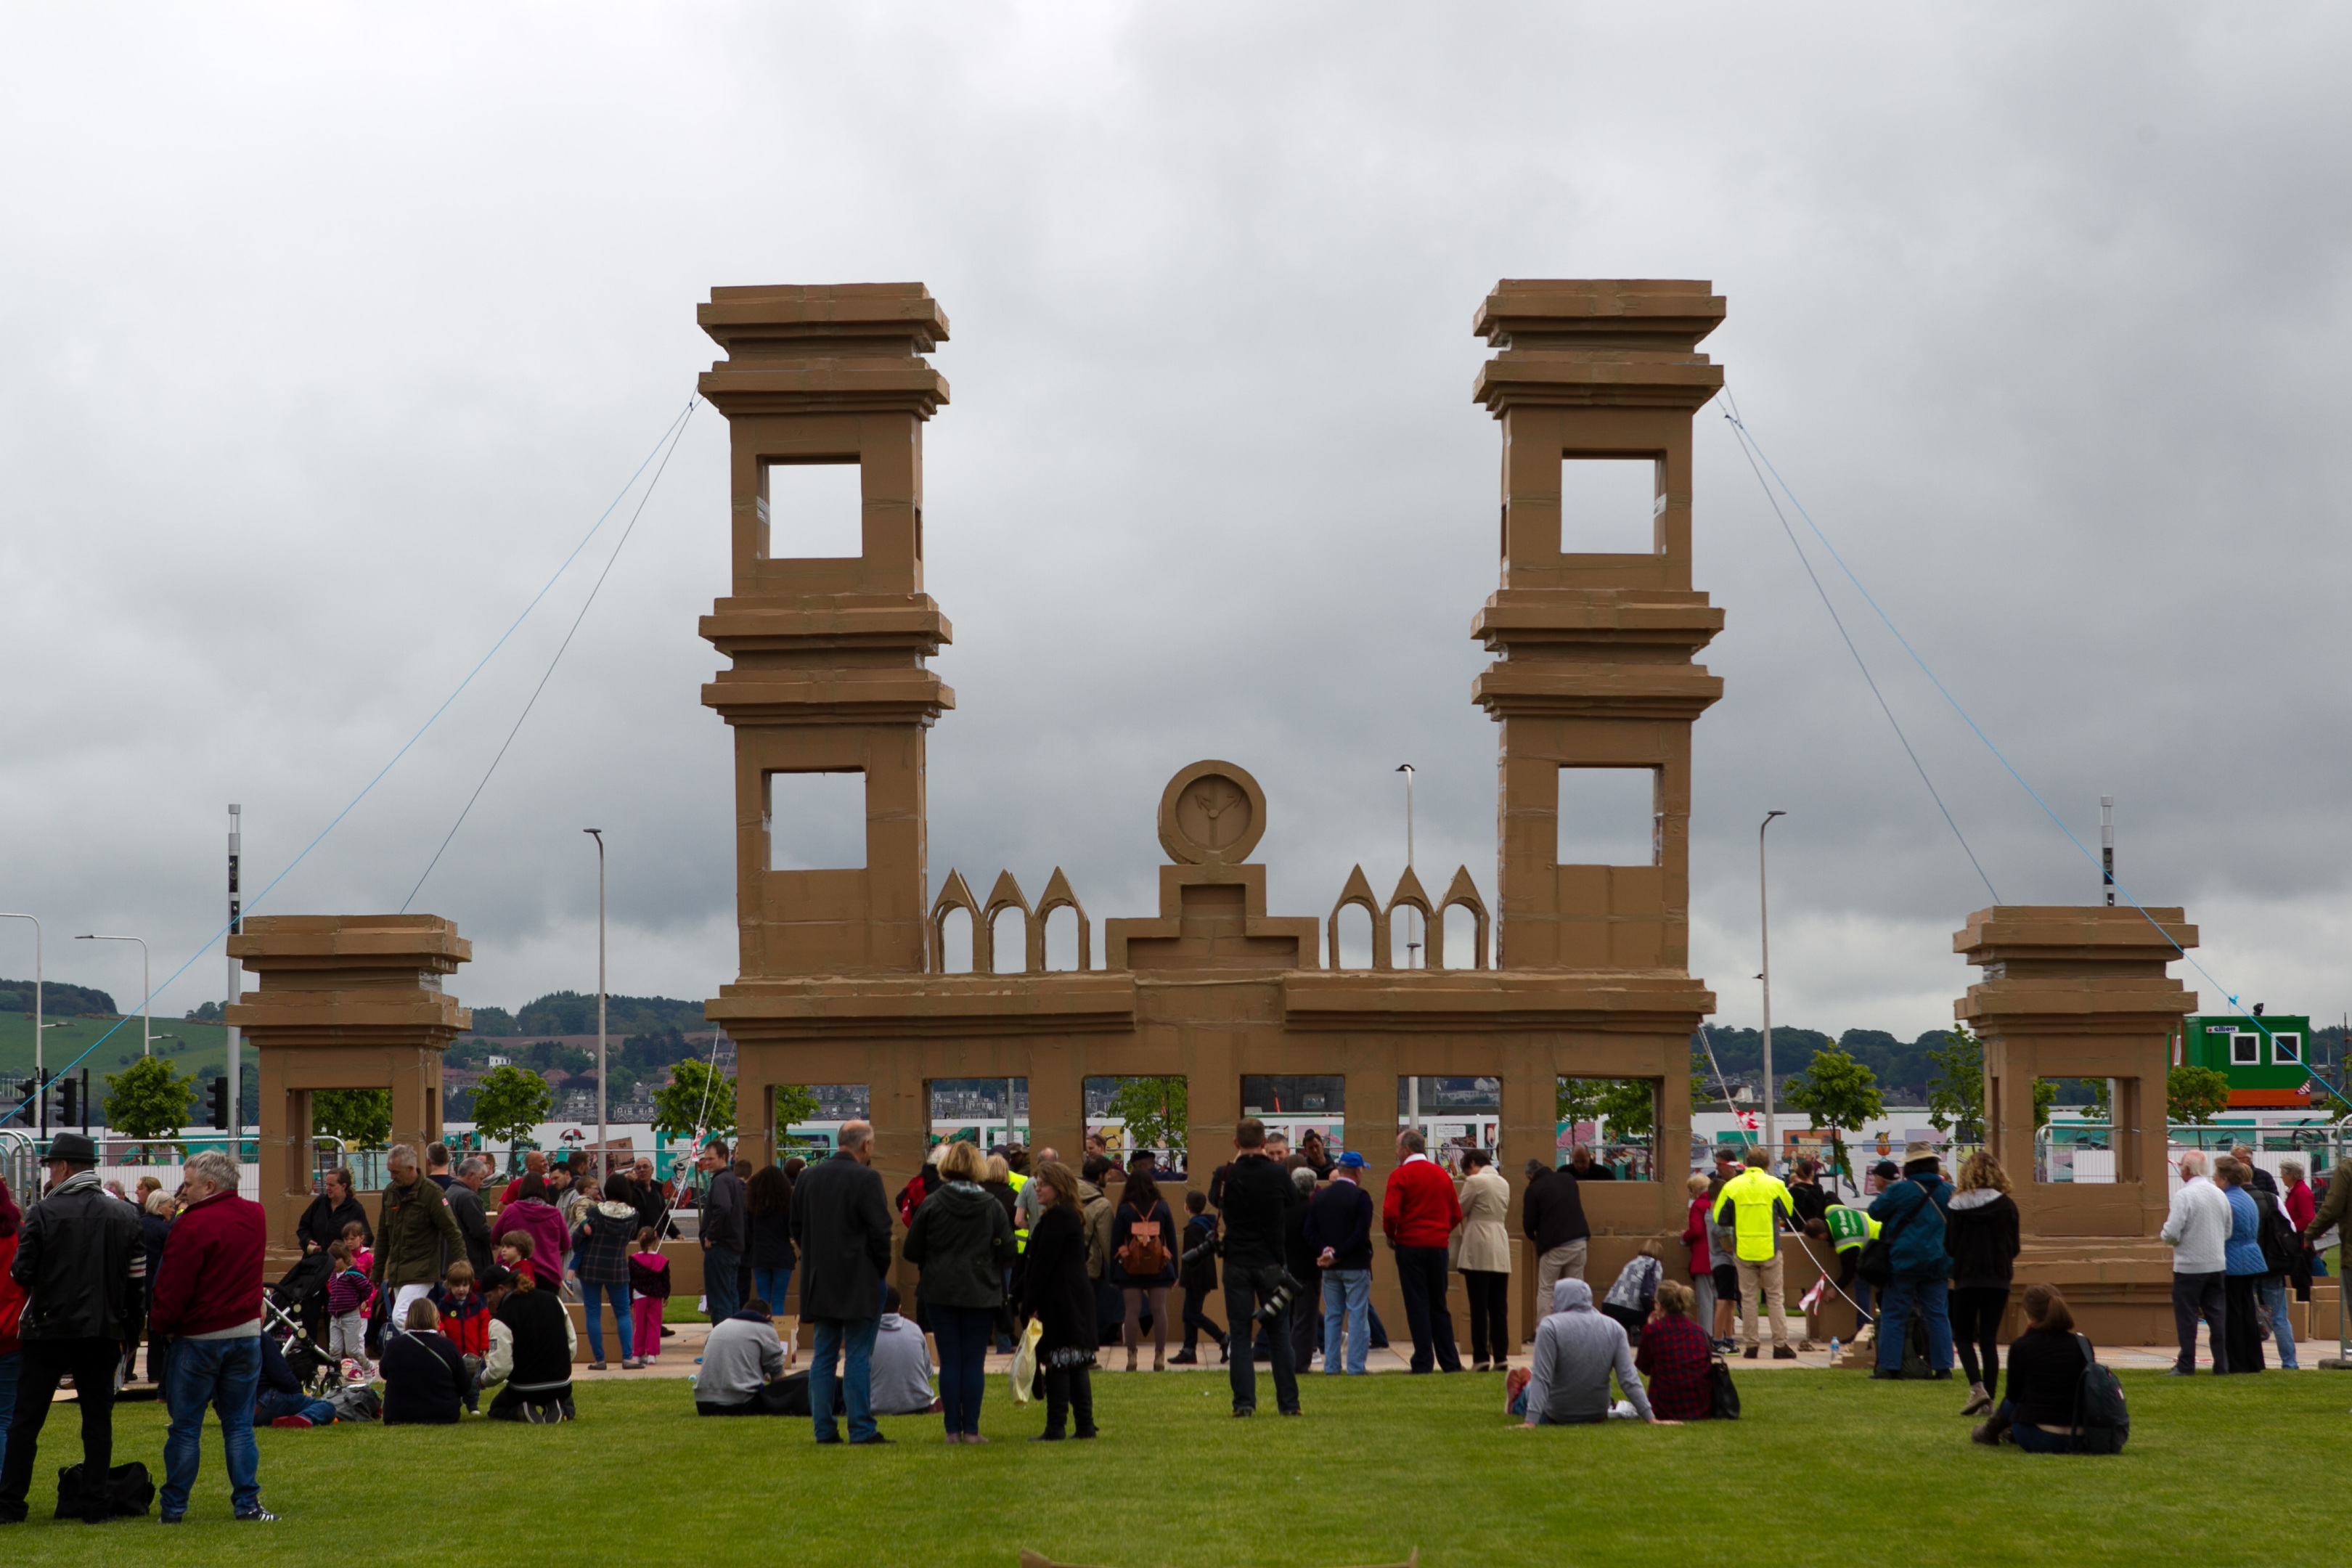 Members of the public helping to build a replica of the Royal Arch made out of cardboard boxes (Andrew Cawley/ Sunday Post)